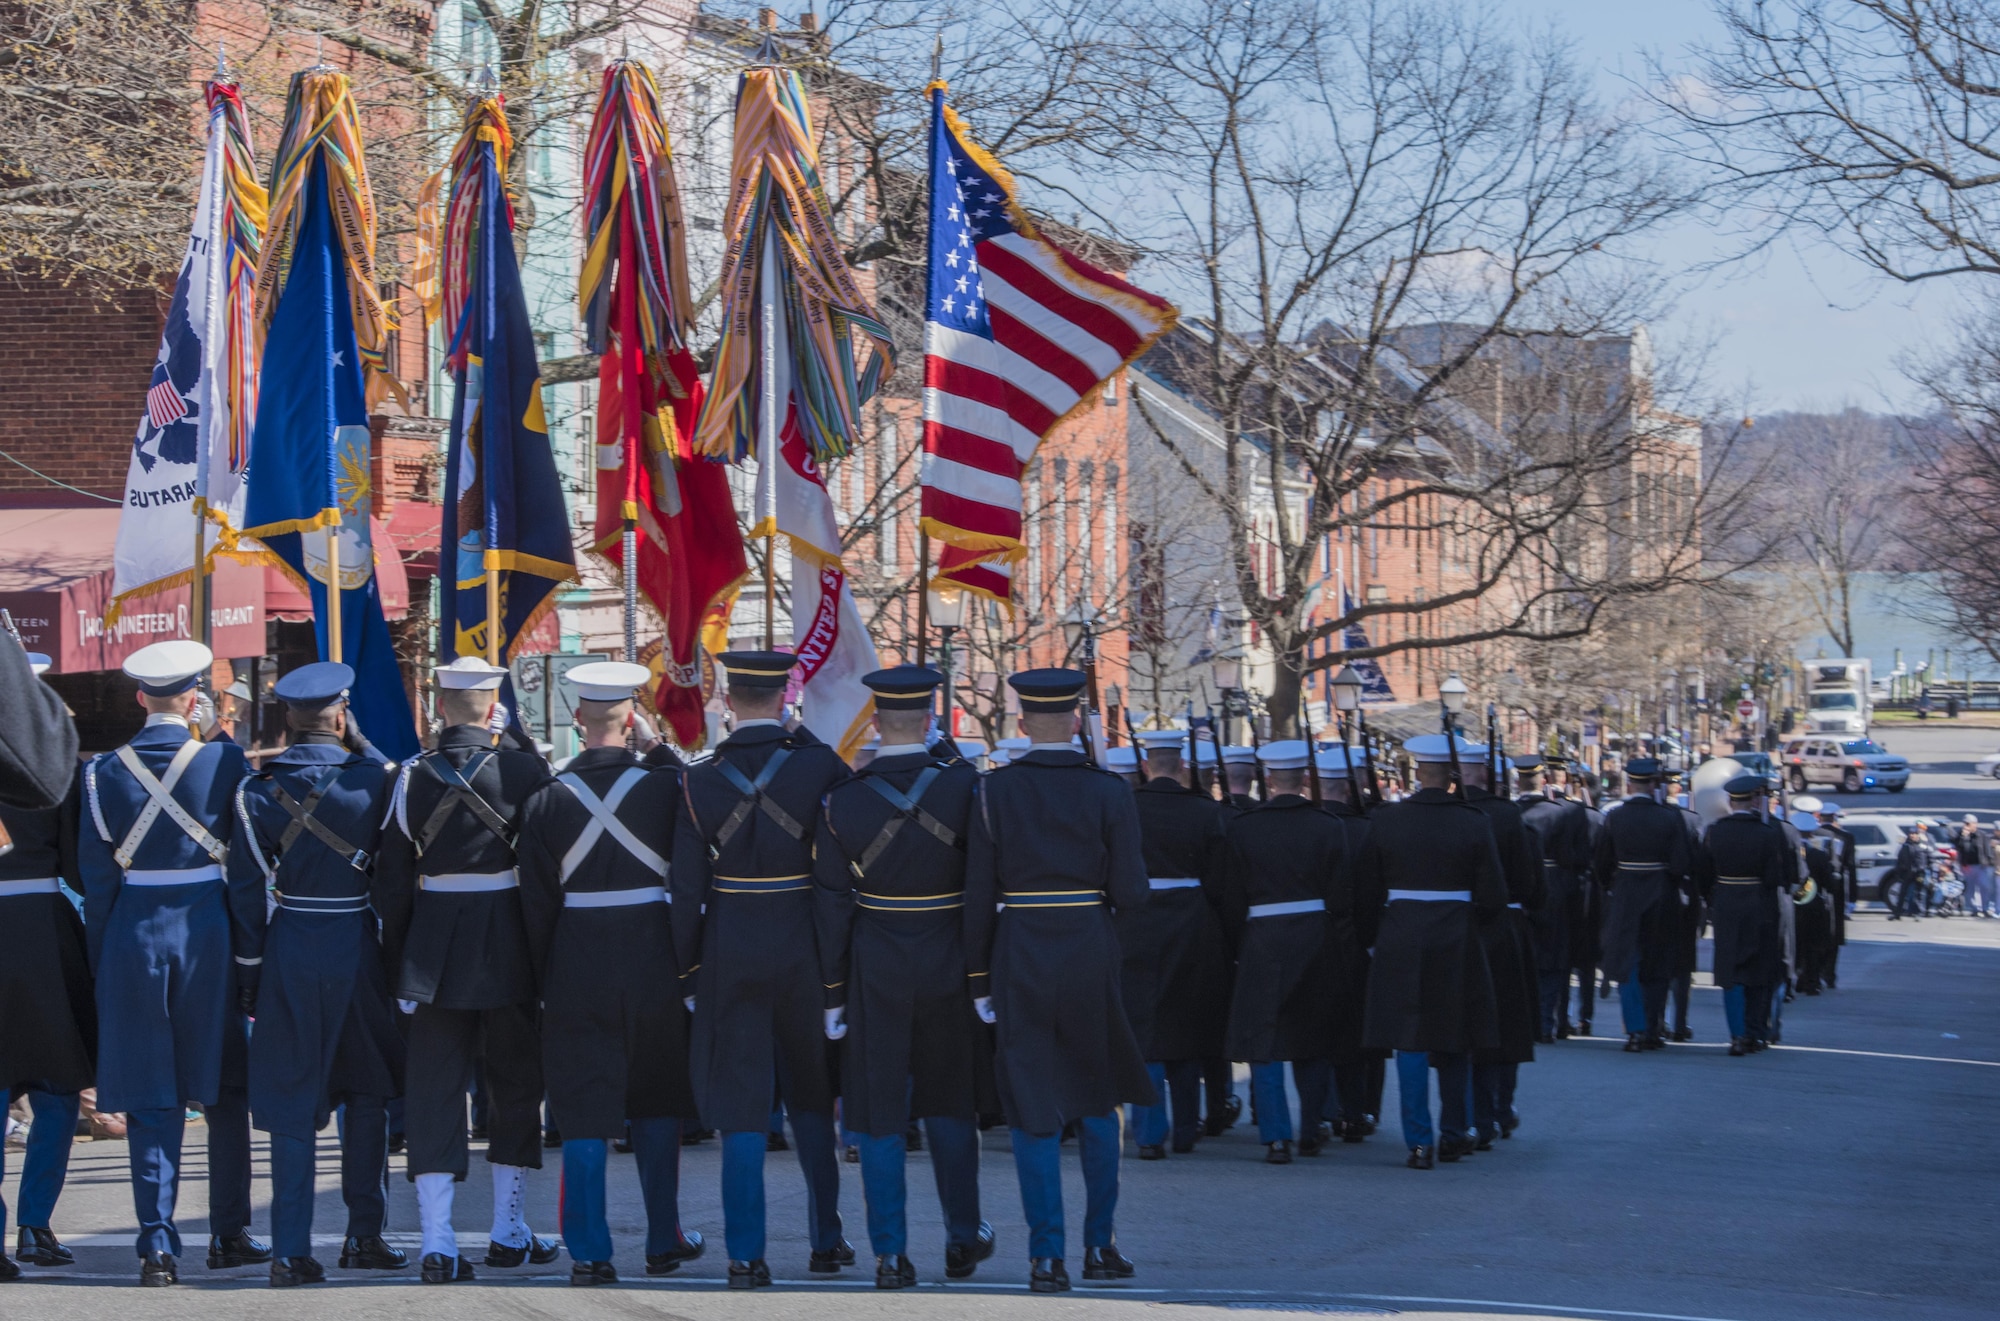 An honor guard composed of members from the Air Force, Army, Coast Guard, Navy and Marines marches in the 2017 Saint Patrick’s Day Parade in Alexandria, Va., March 4, 2017. In addition to participating in community events like parades, the ceremonial honor guard flights perform an average of 10 ceremonies each day to represent Airmen to the American public and the world. (U.S. Air Force photo by Senior Airman Jordyn Fetter)